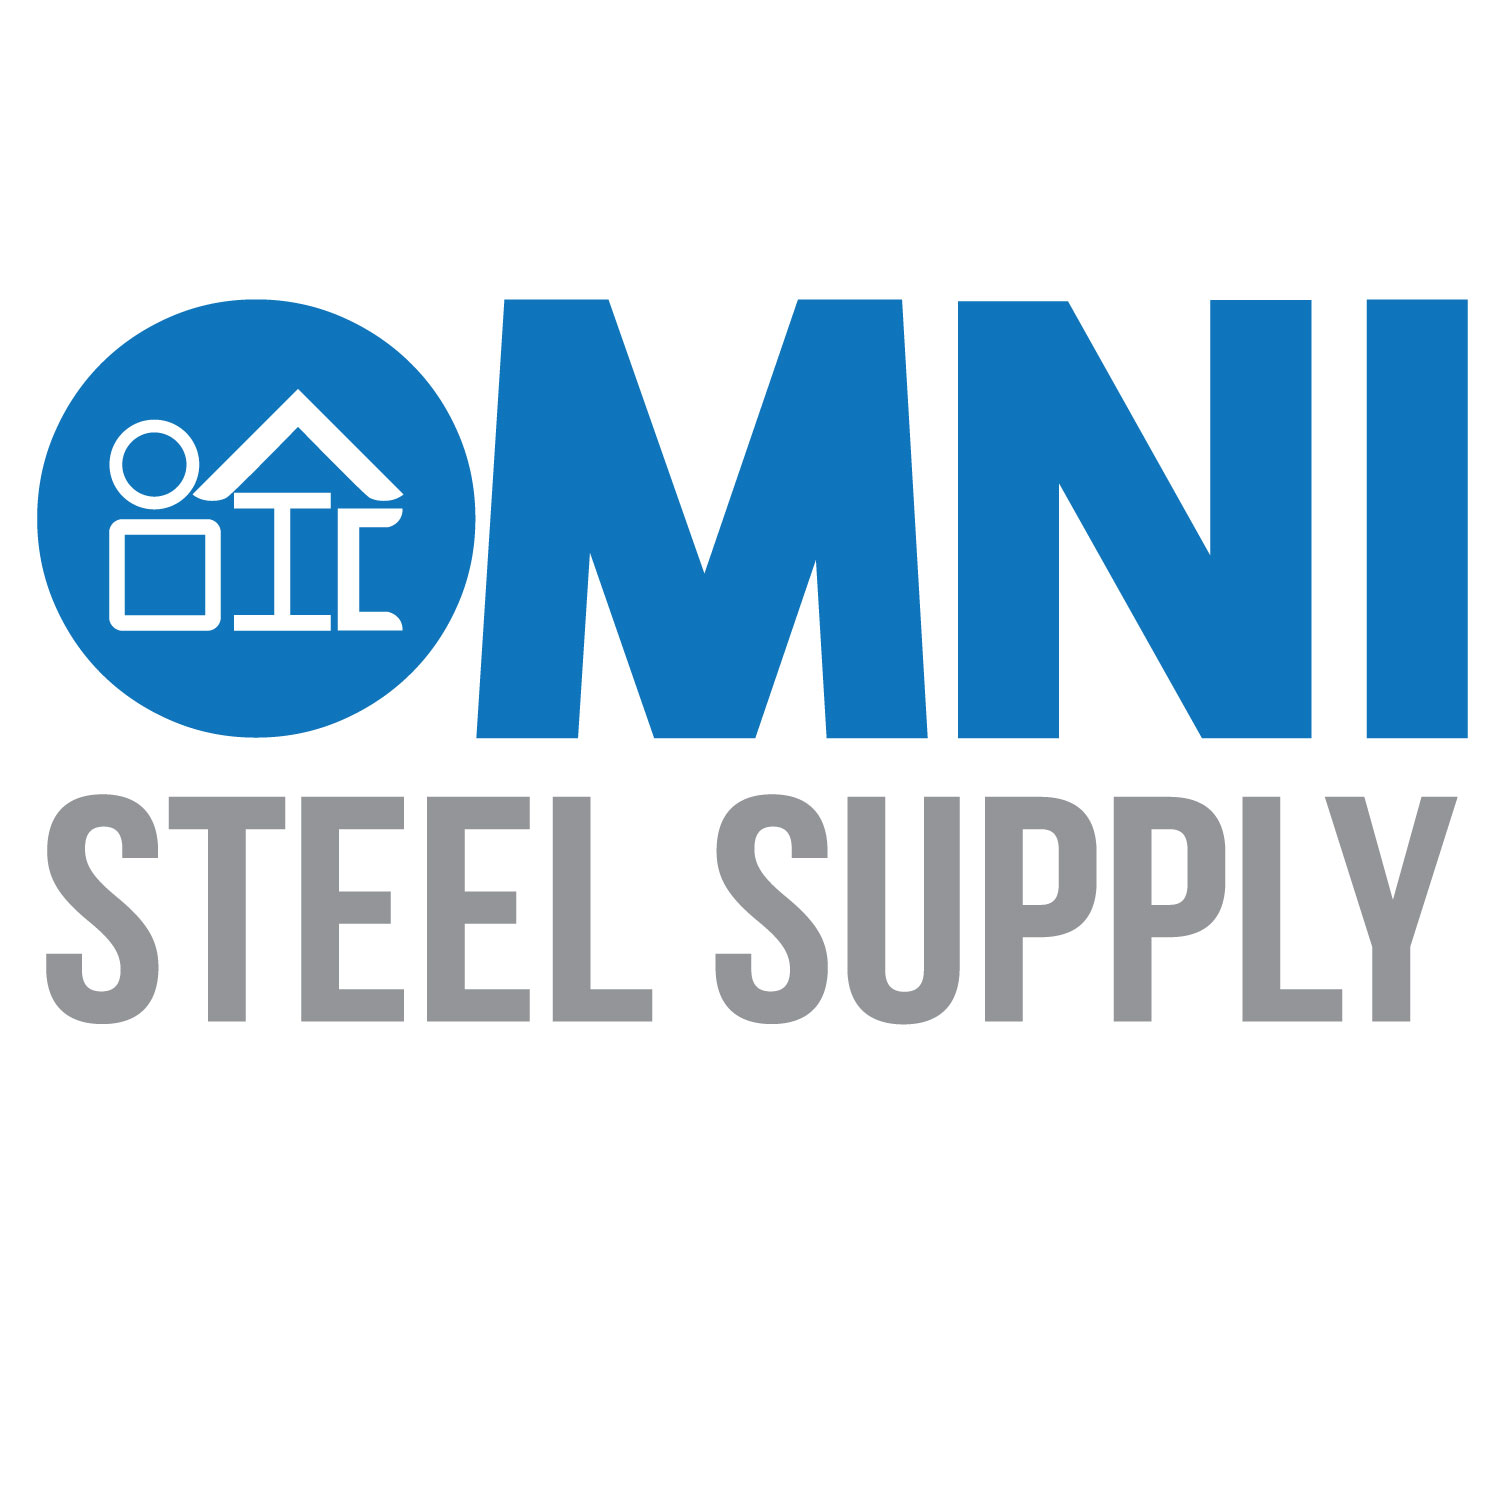 Omni Steel Supply is ERPLY's Customer of the Month! blog post cover image